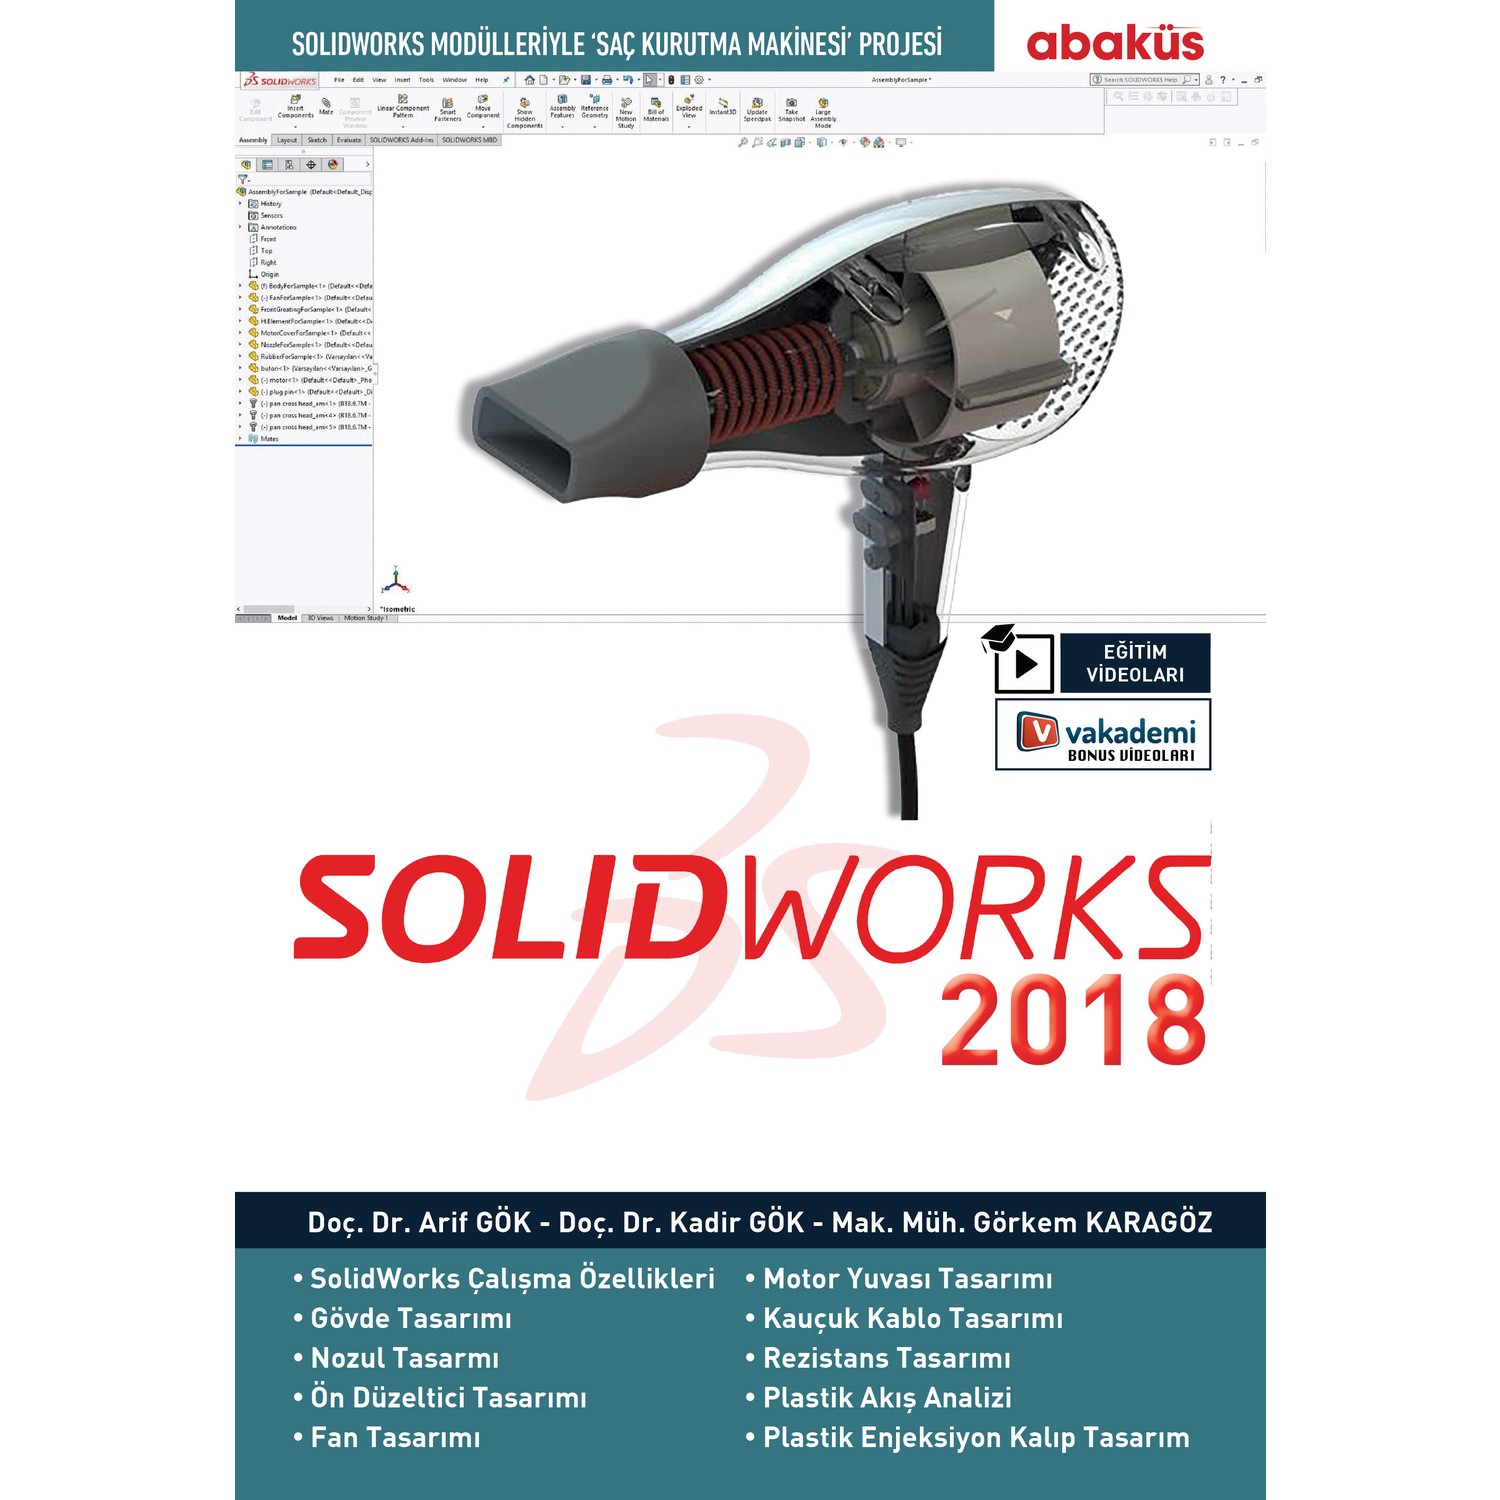 can solidworks 2017 work on 2018